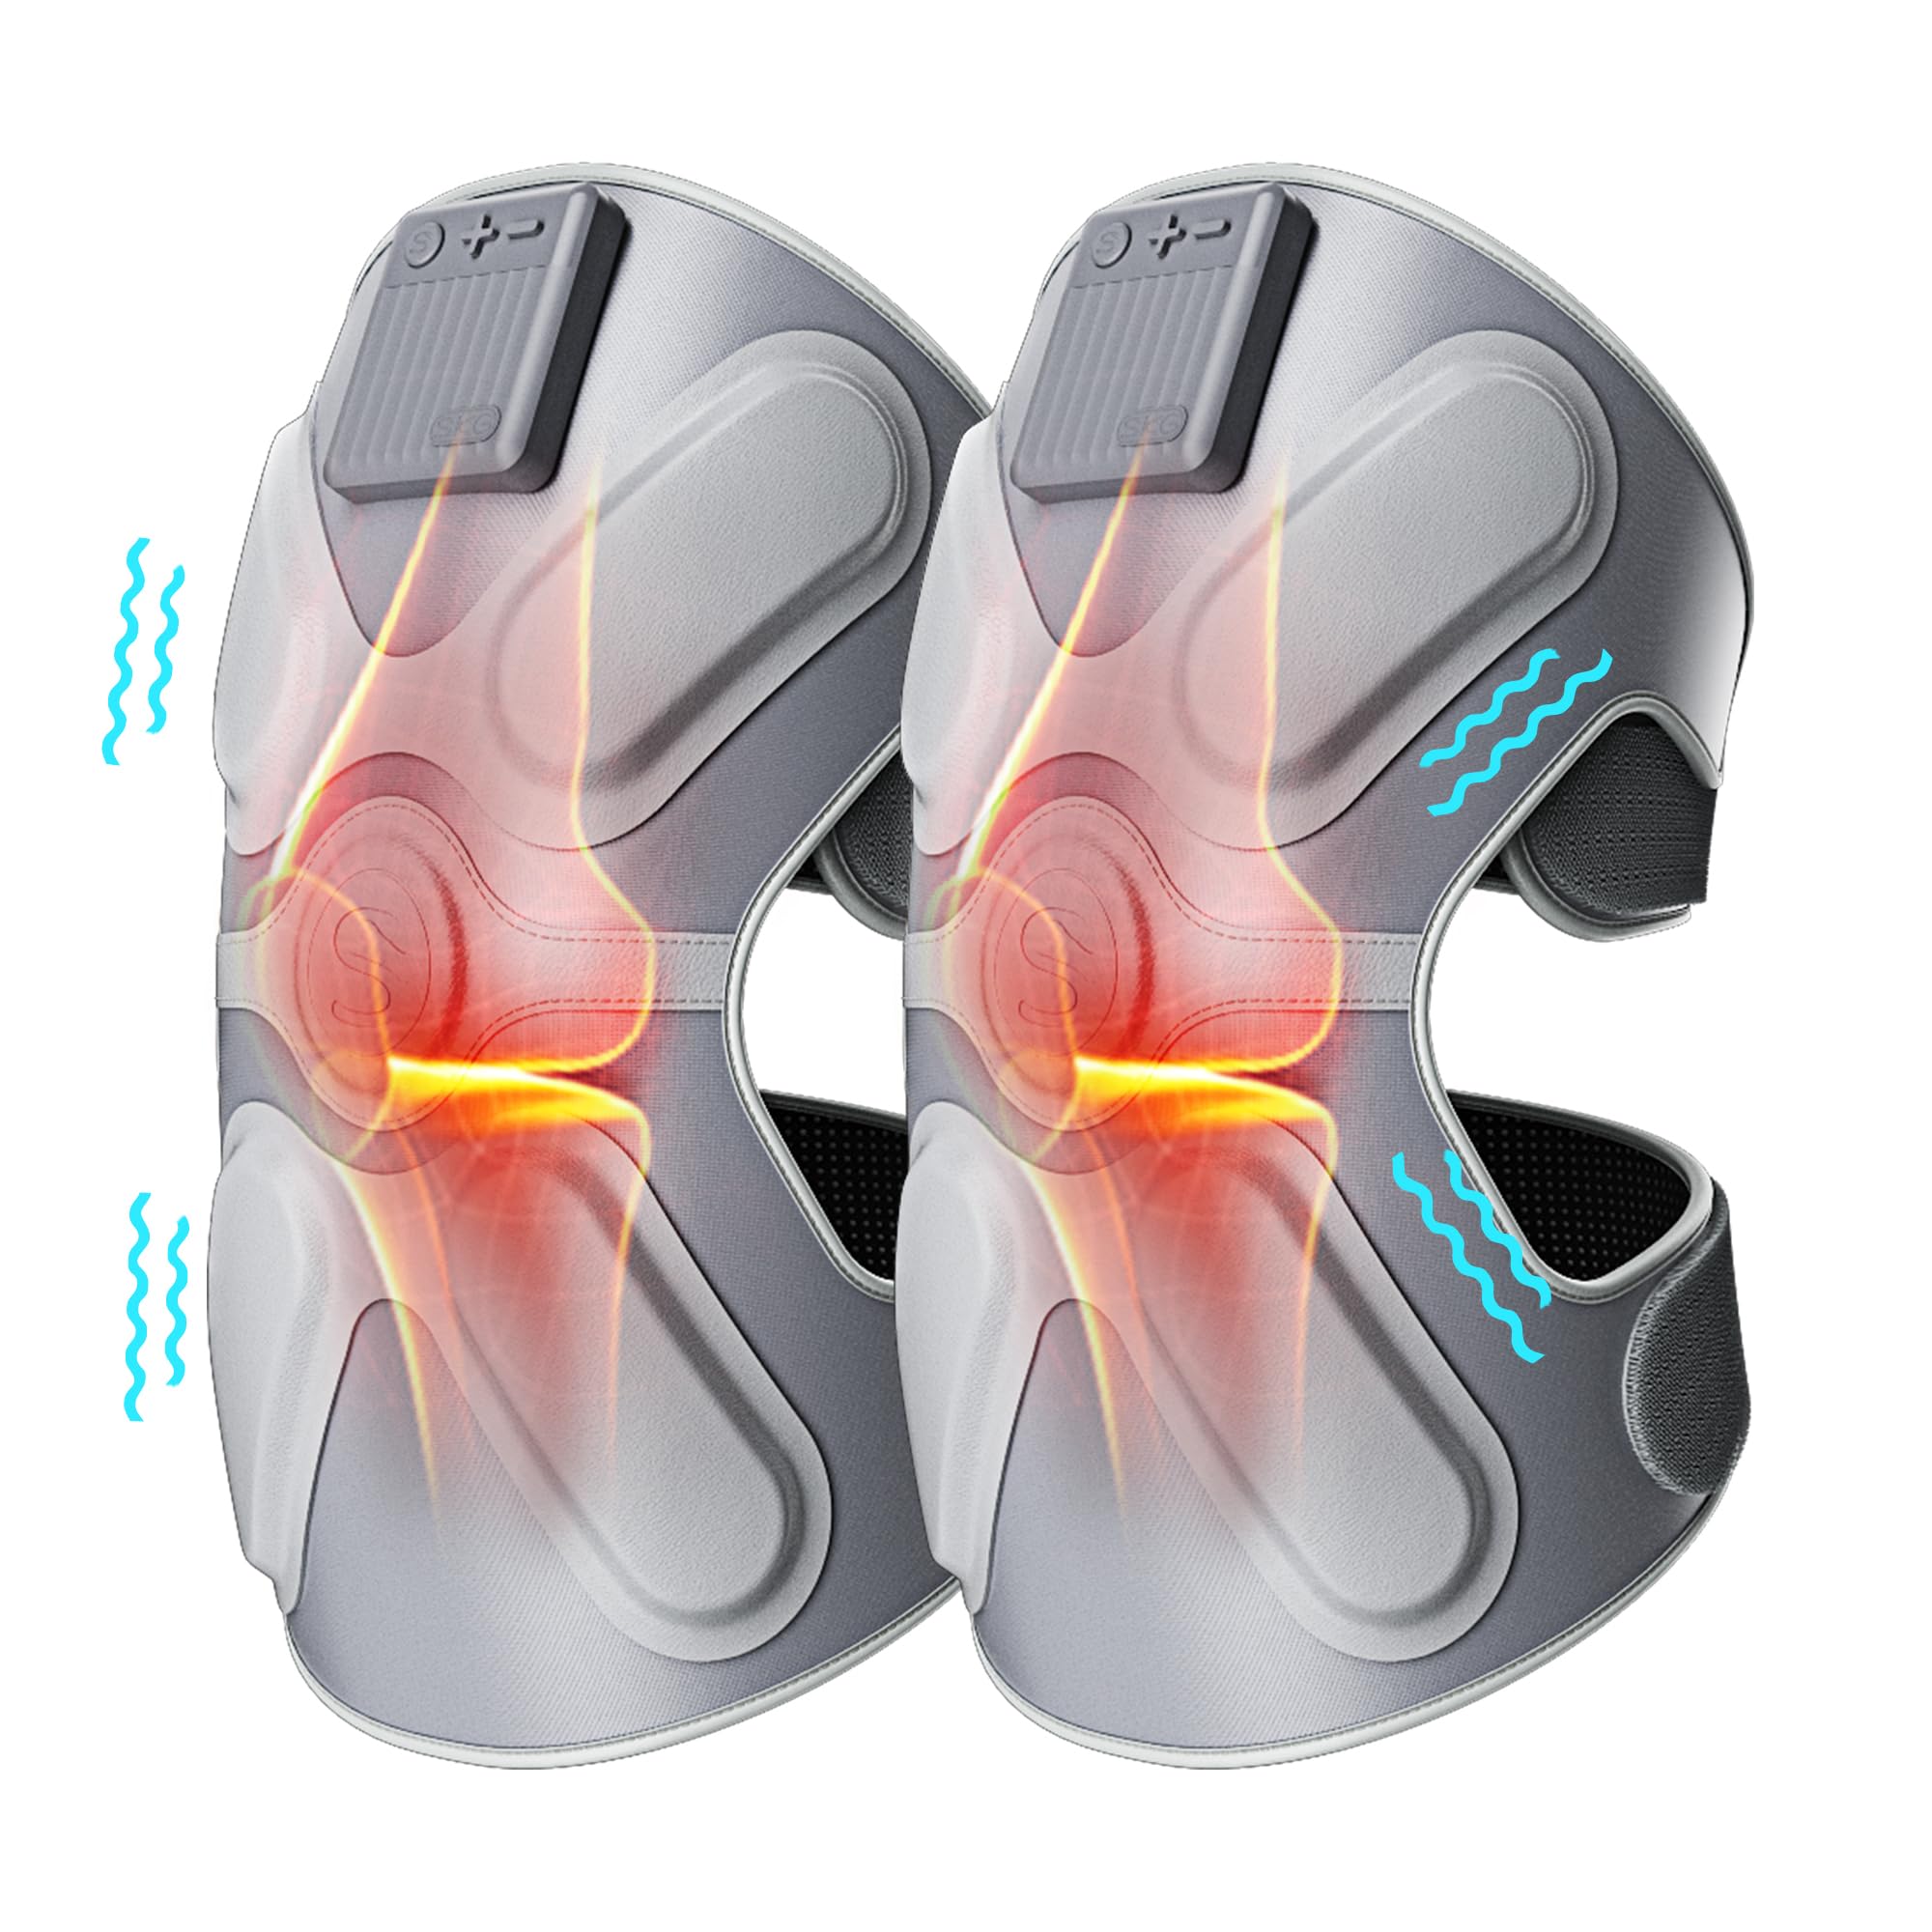 SKG W3 Pro Knee Massager with Heat and Vibration